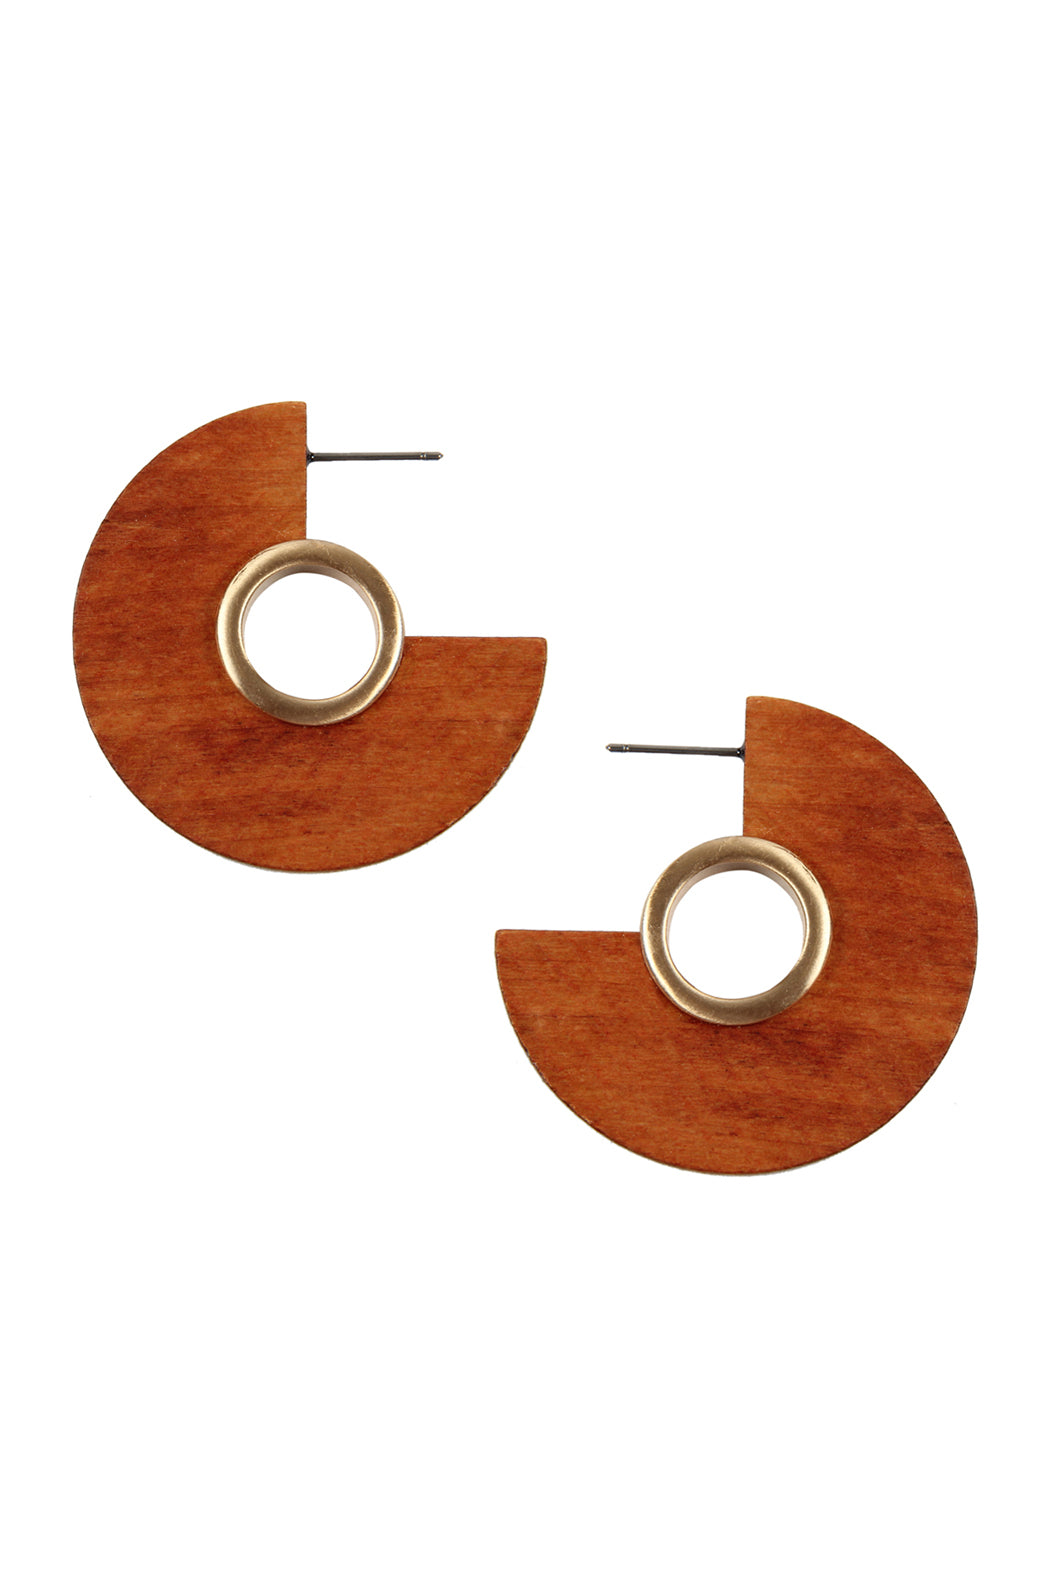 ROUND SHAPE SLICED WOOD POST EARRINGS/6PCS (NOW $1.00 ONLY!)